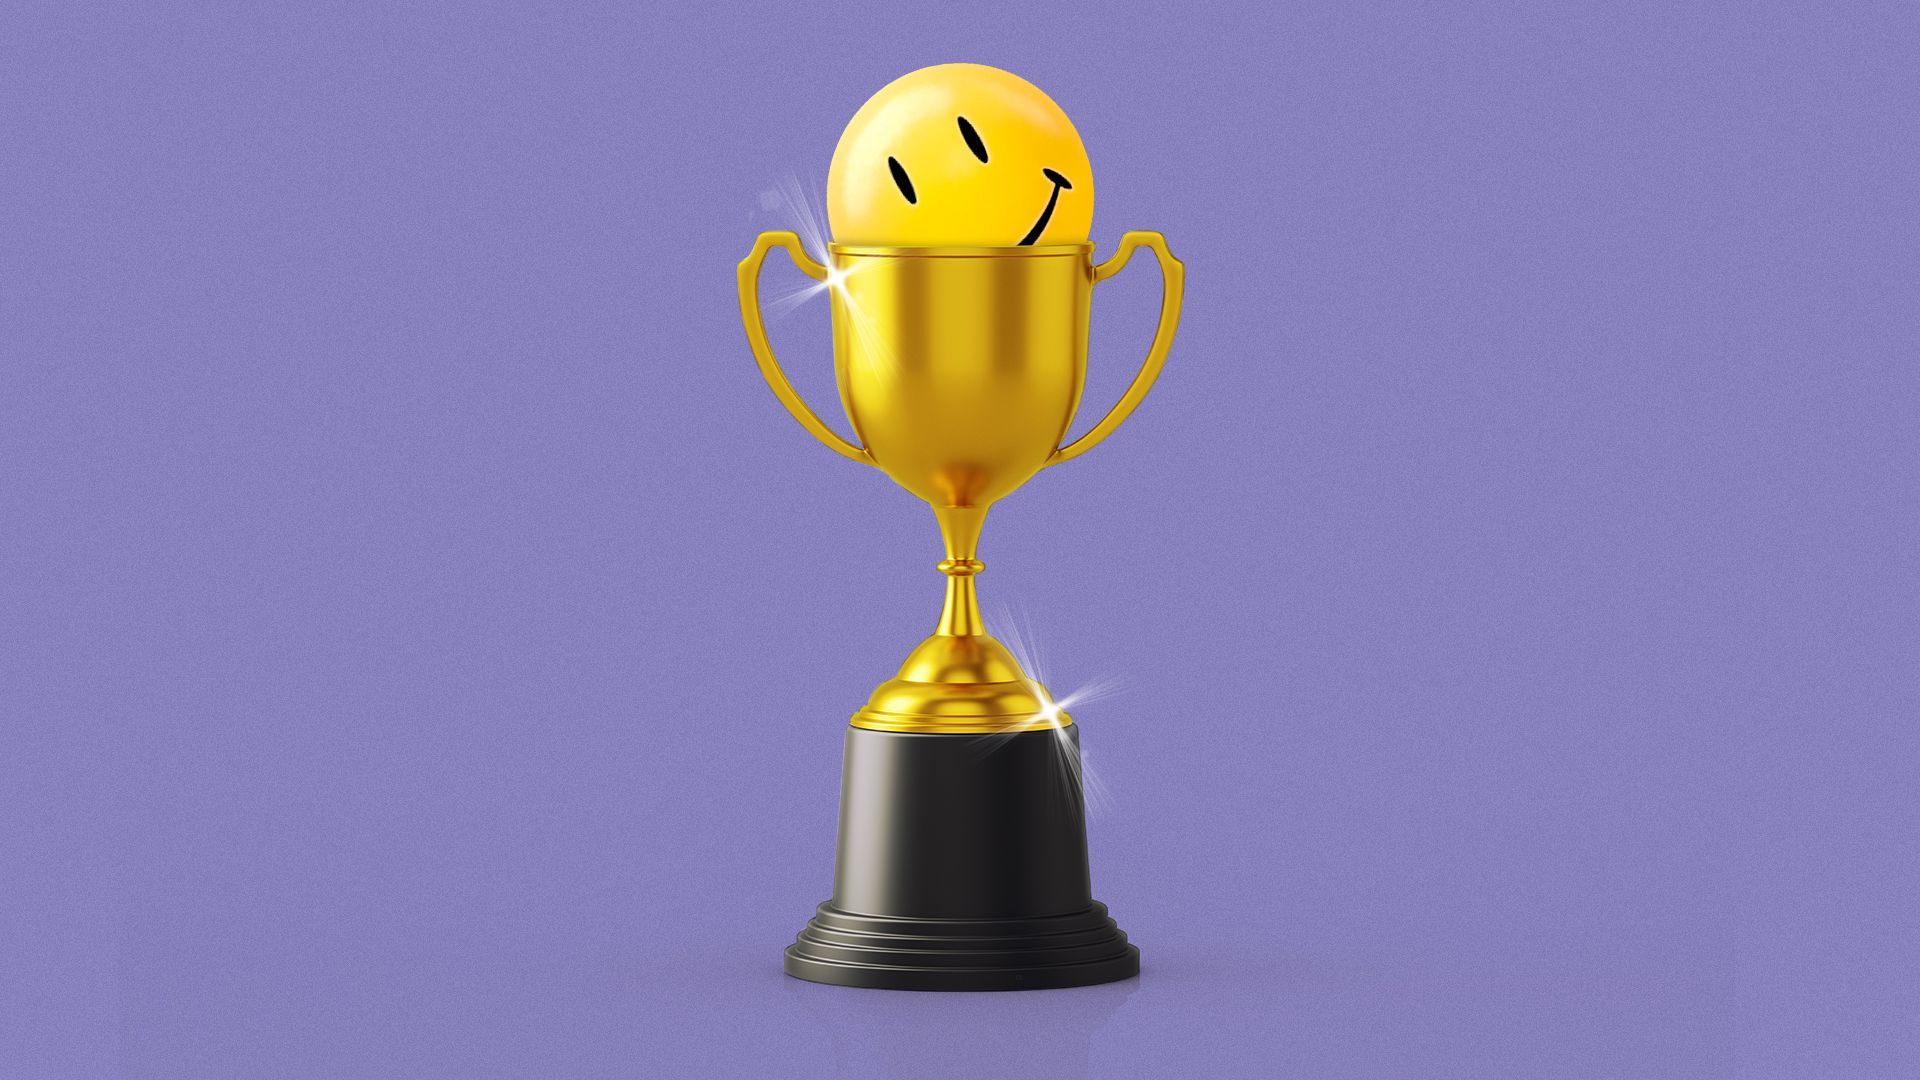 Illustration of the Walmart smiley face in a golden trophy cup